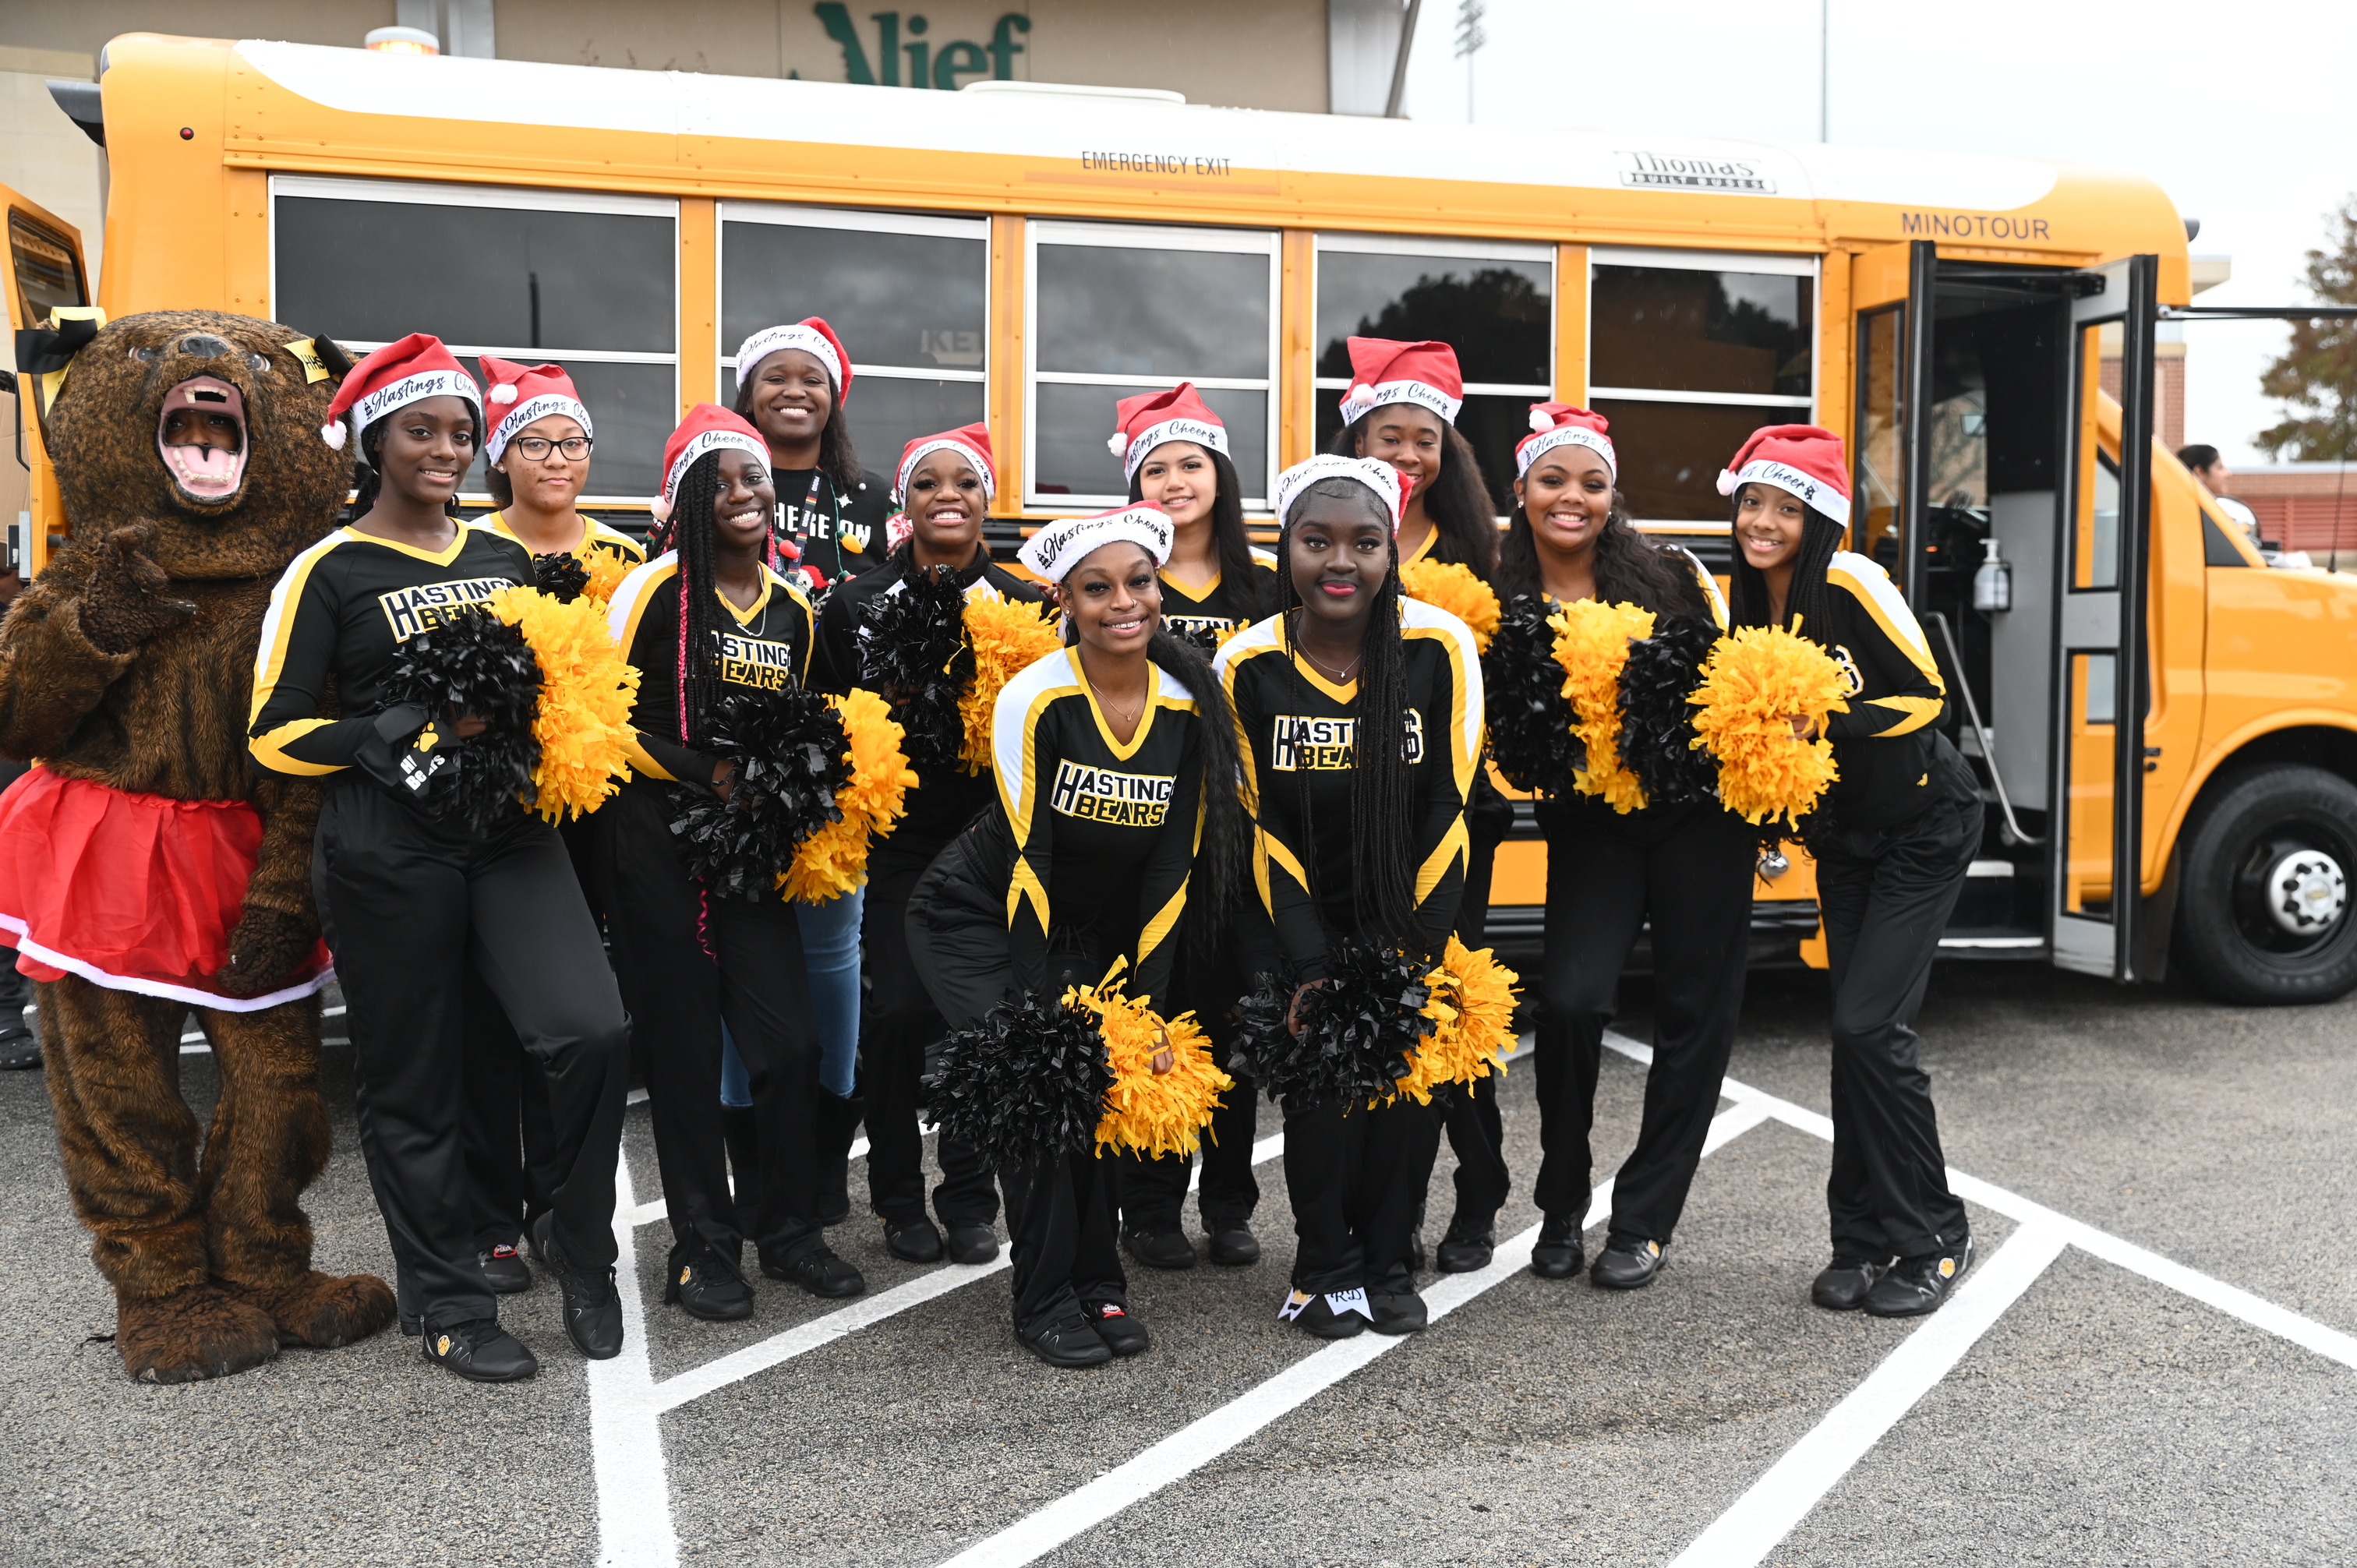 Alief ISD cheerleaders, mascots, choir students, and sponsors support the annual Stuff-A-Bus by performing for community members and donating uniforms and school supplies for our pantry.